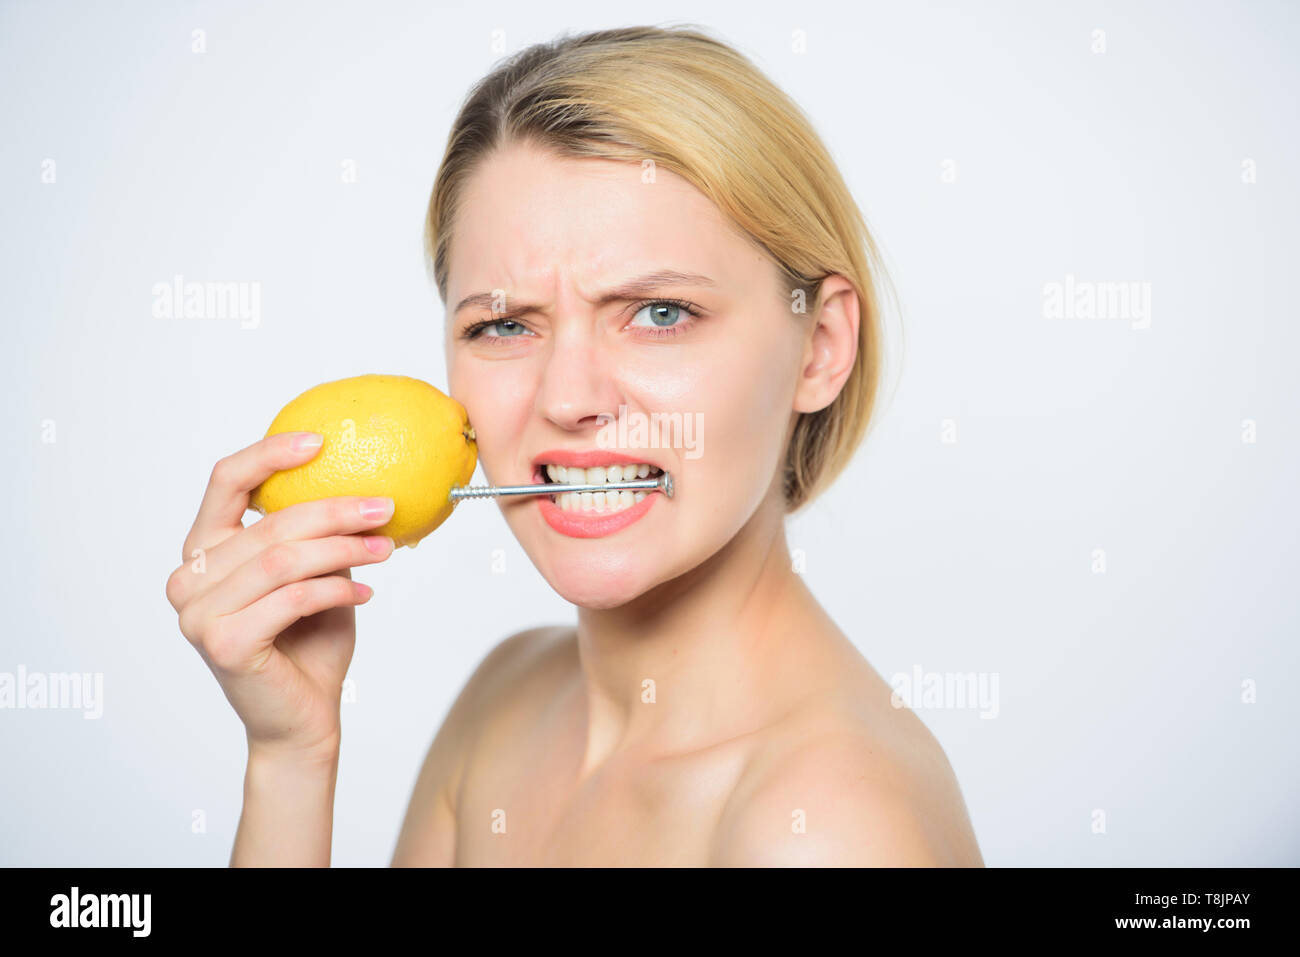 battery science project. woman with hobnail at lemon. vitamin diet food. skincare. energy and positive mood. girl with lemon charging. Recharge your body vitamins. fresh fruit juice. lemon battery. Stock Photo